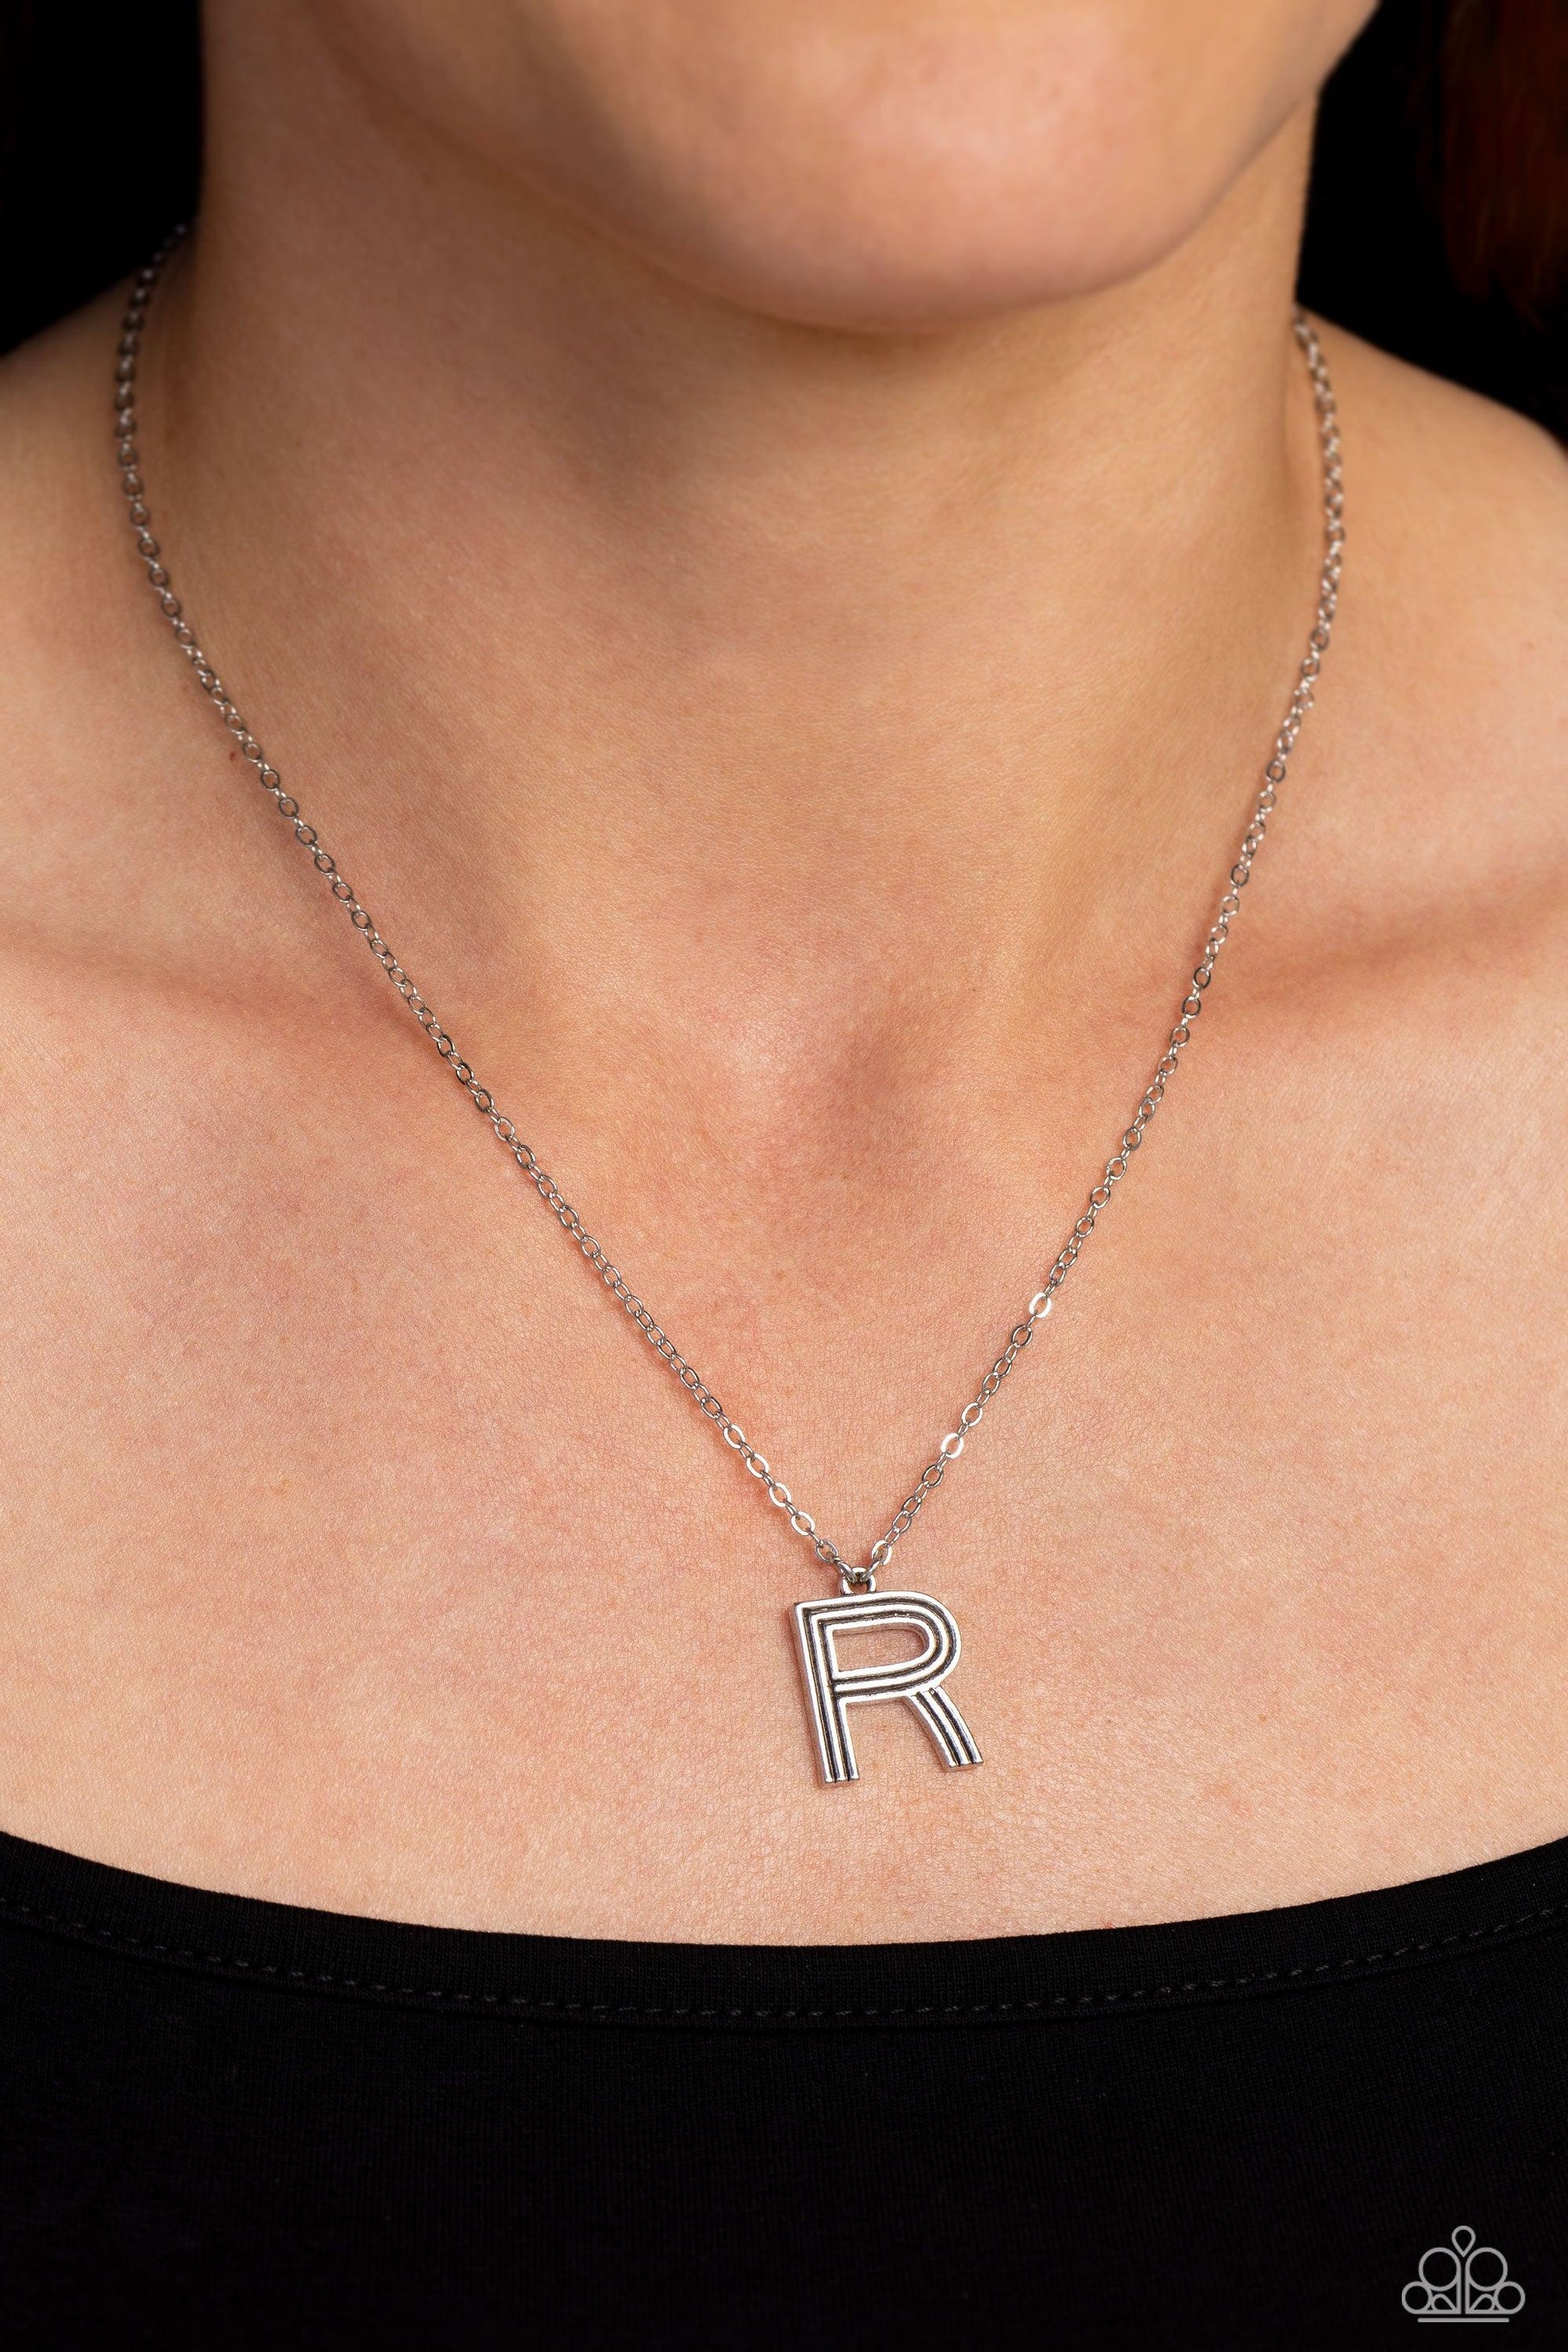 Paparazzi Accessories - Leave Your Initials - Silver - R Necklace - Bling by JessieK